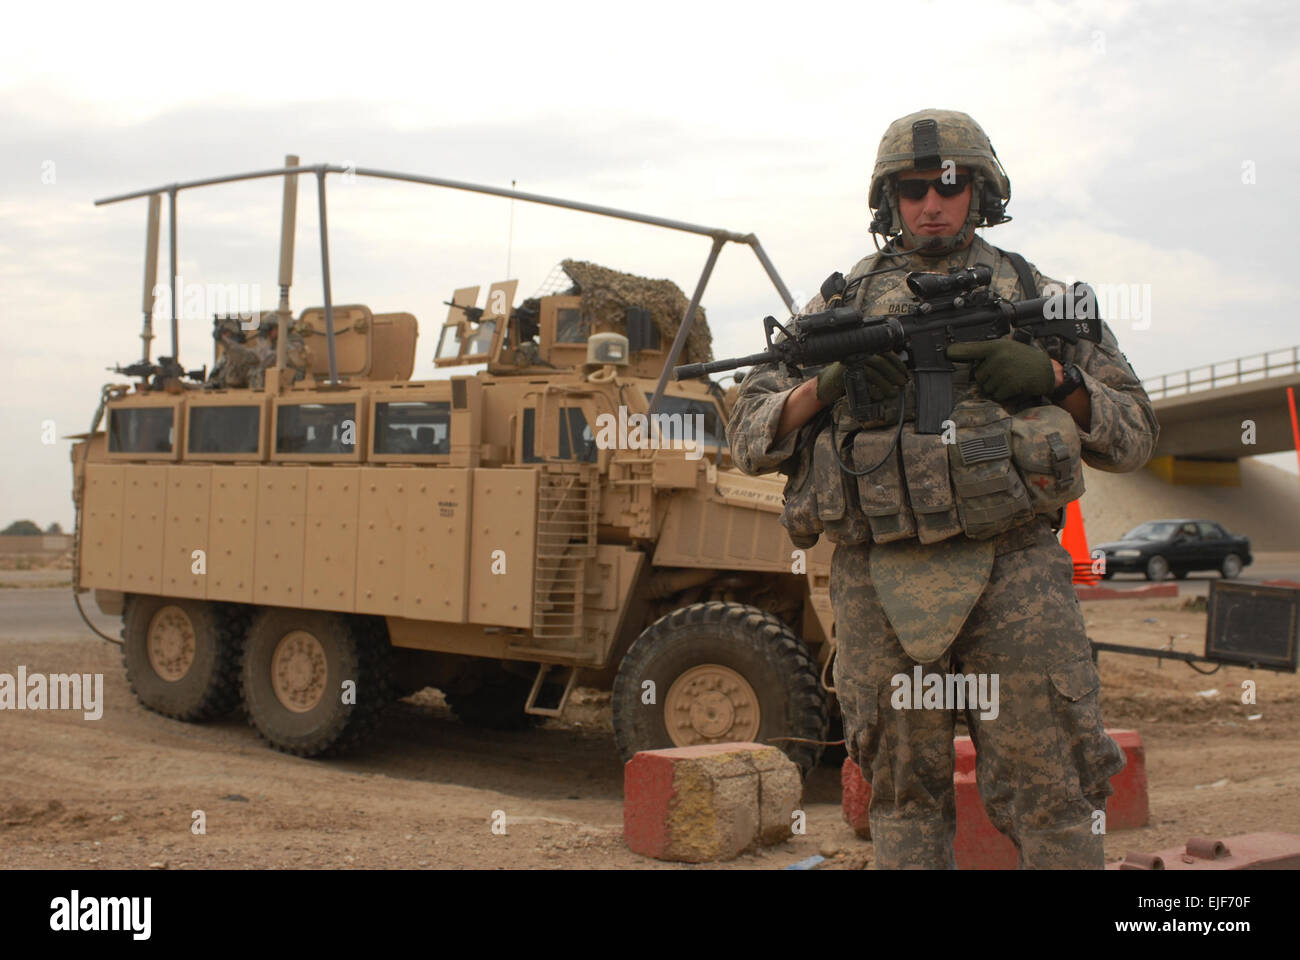 U.S Army 1st Lt. Andrew Dacey, attached to the 2nd Brigade, 1st Infantry Division, stands in front of an ambush-protected vehicle in Abu Ghraib, Iraq, March 31. Stock Photo